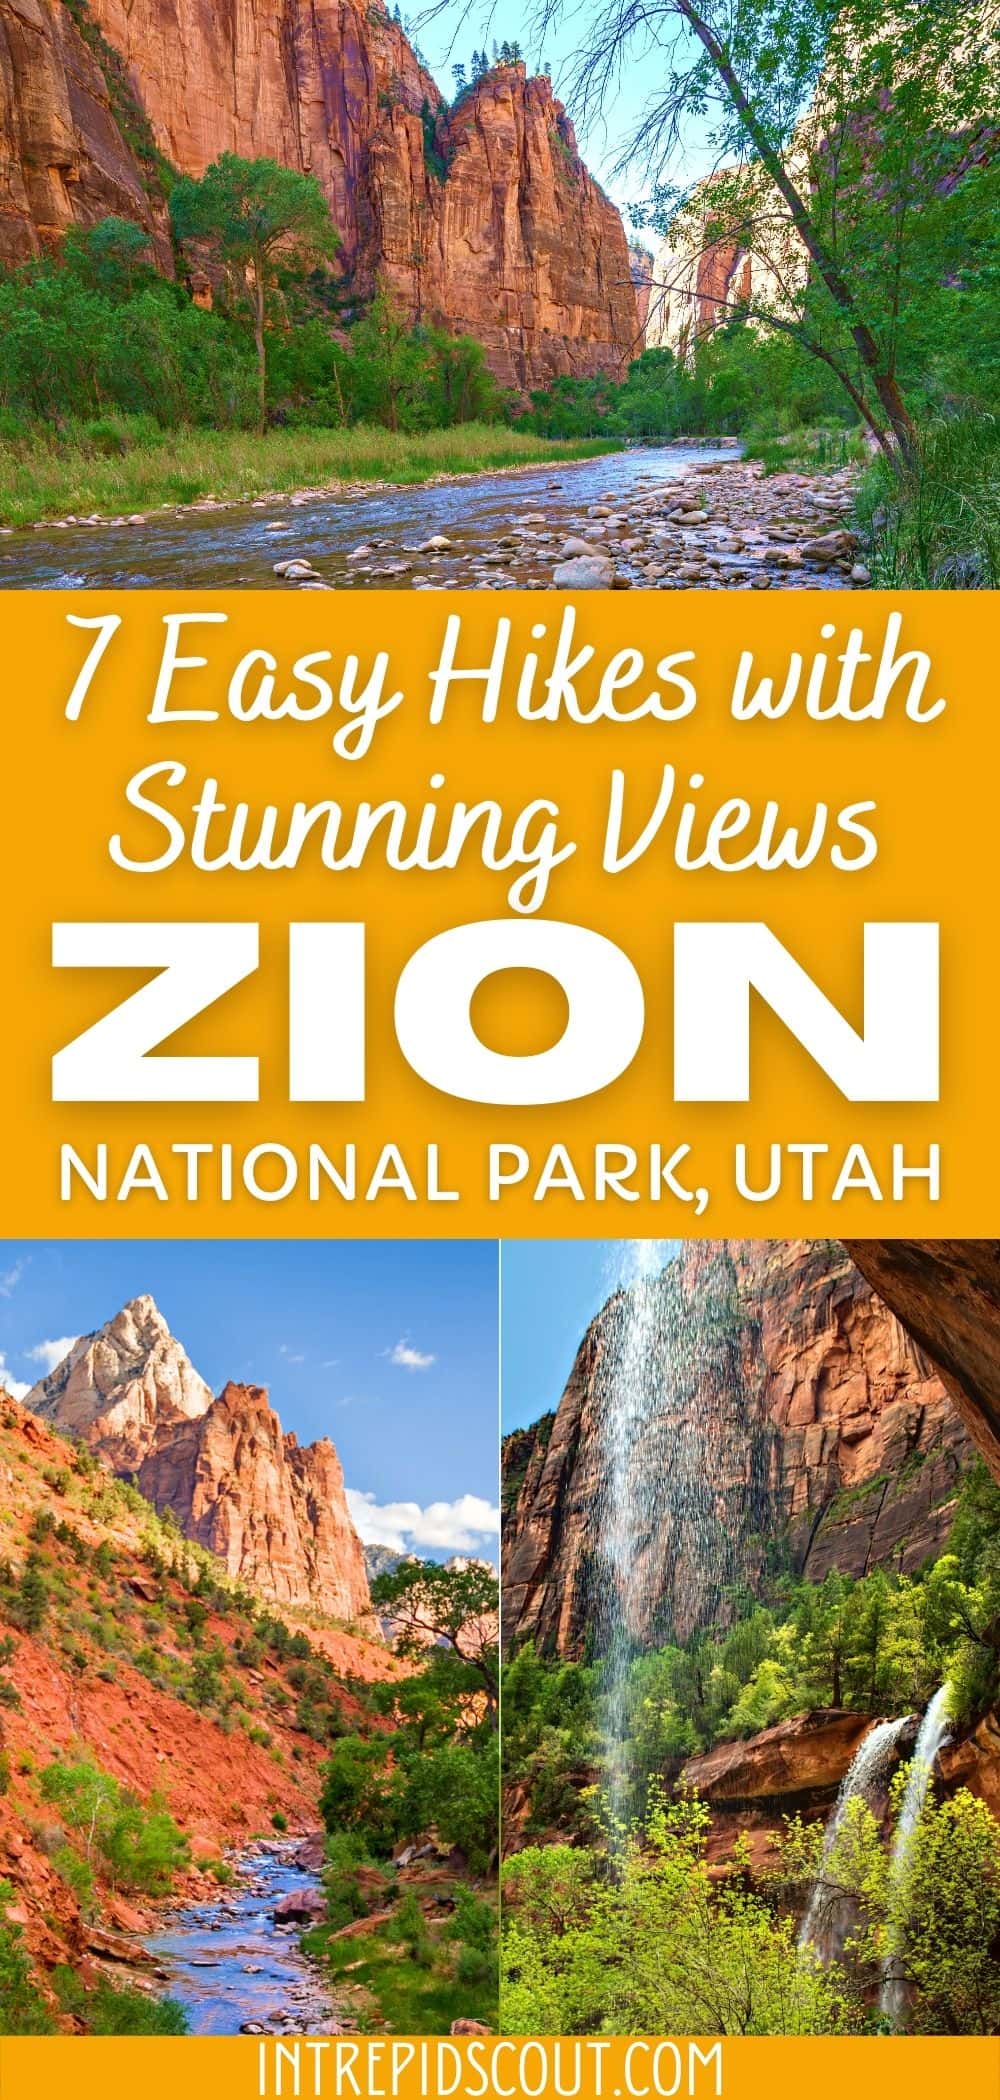 Easy Hikes in Zion